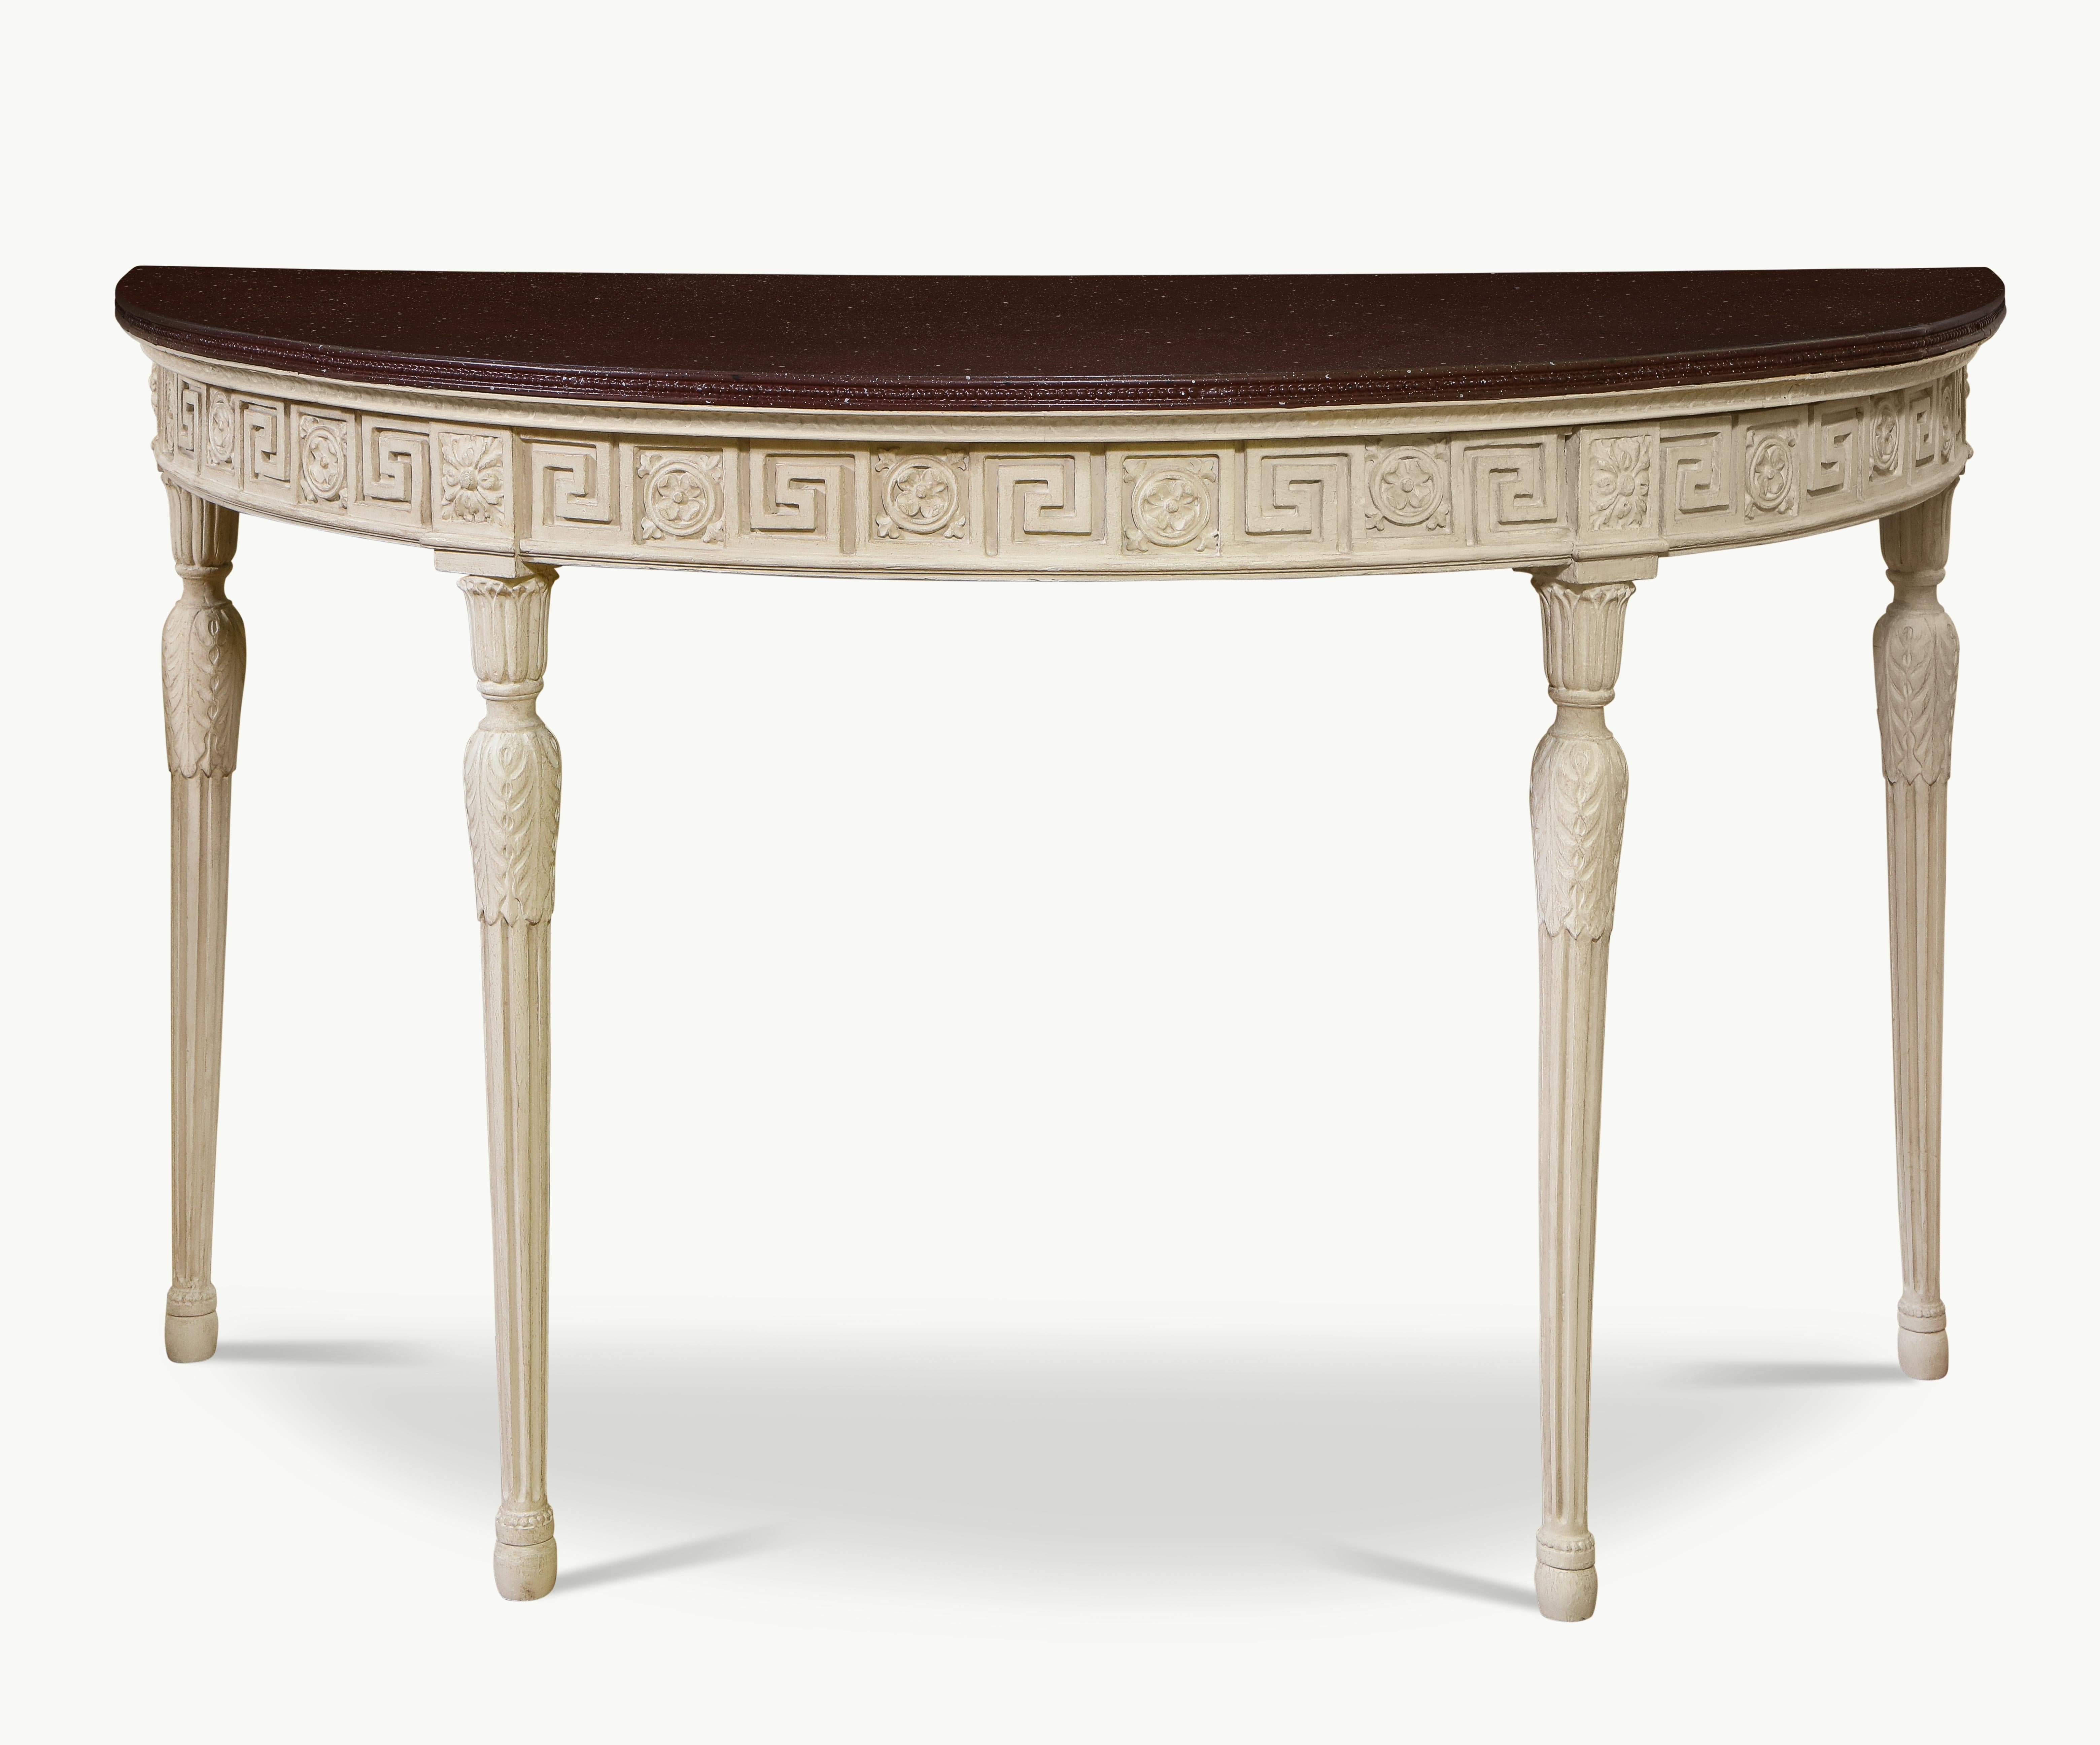 Each top painted in faux porphyry with beaded edge; over a white-painted base with Greek key and rosette carved frieze, raised on turned tapering stop-fluted legs wrapped with acanthus leaves and headed by foliate capitals.